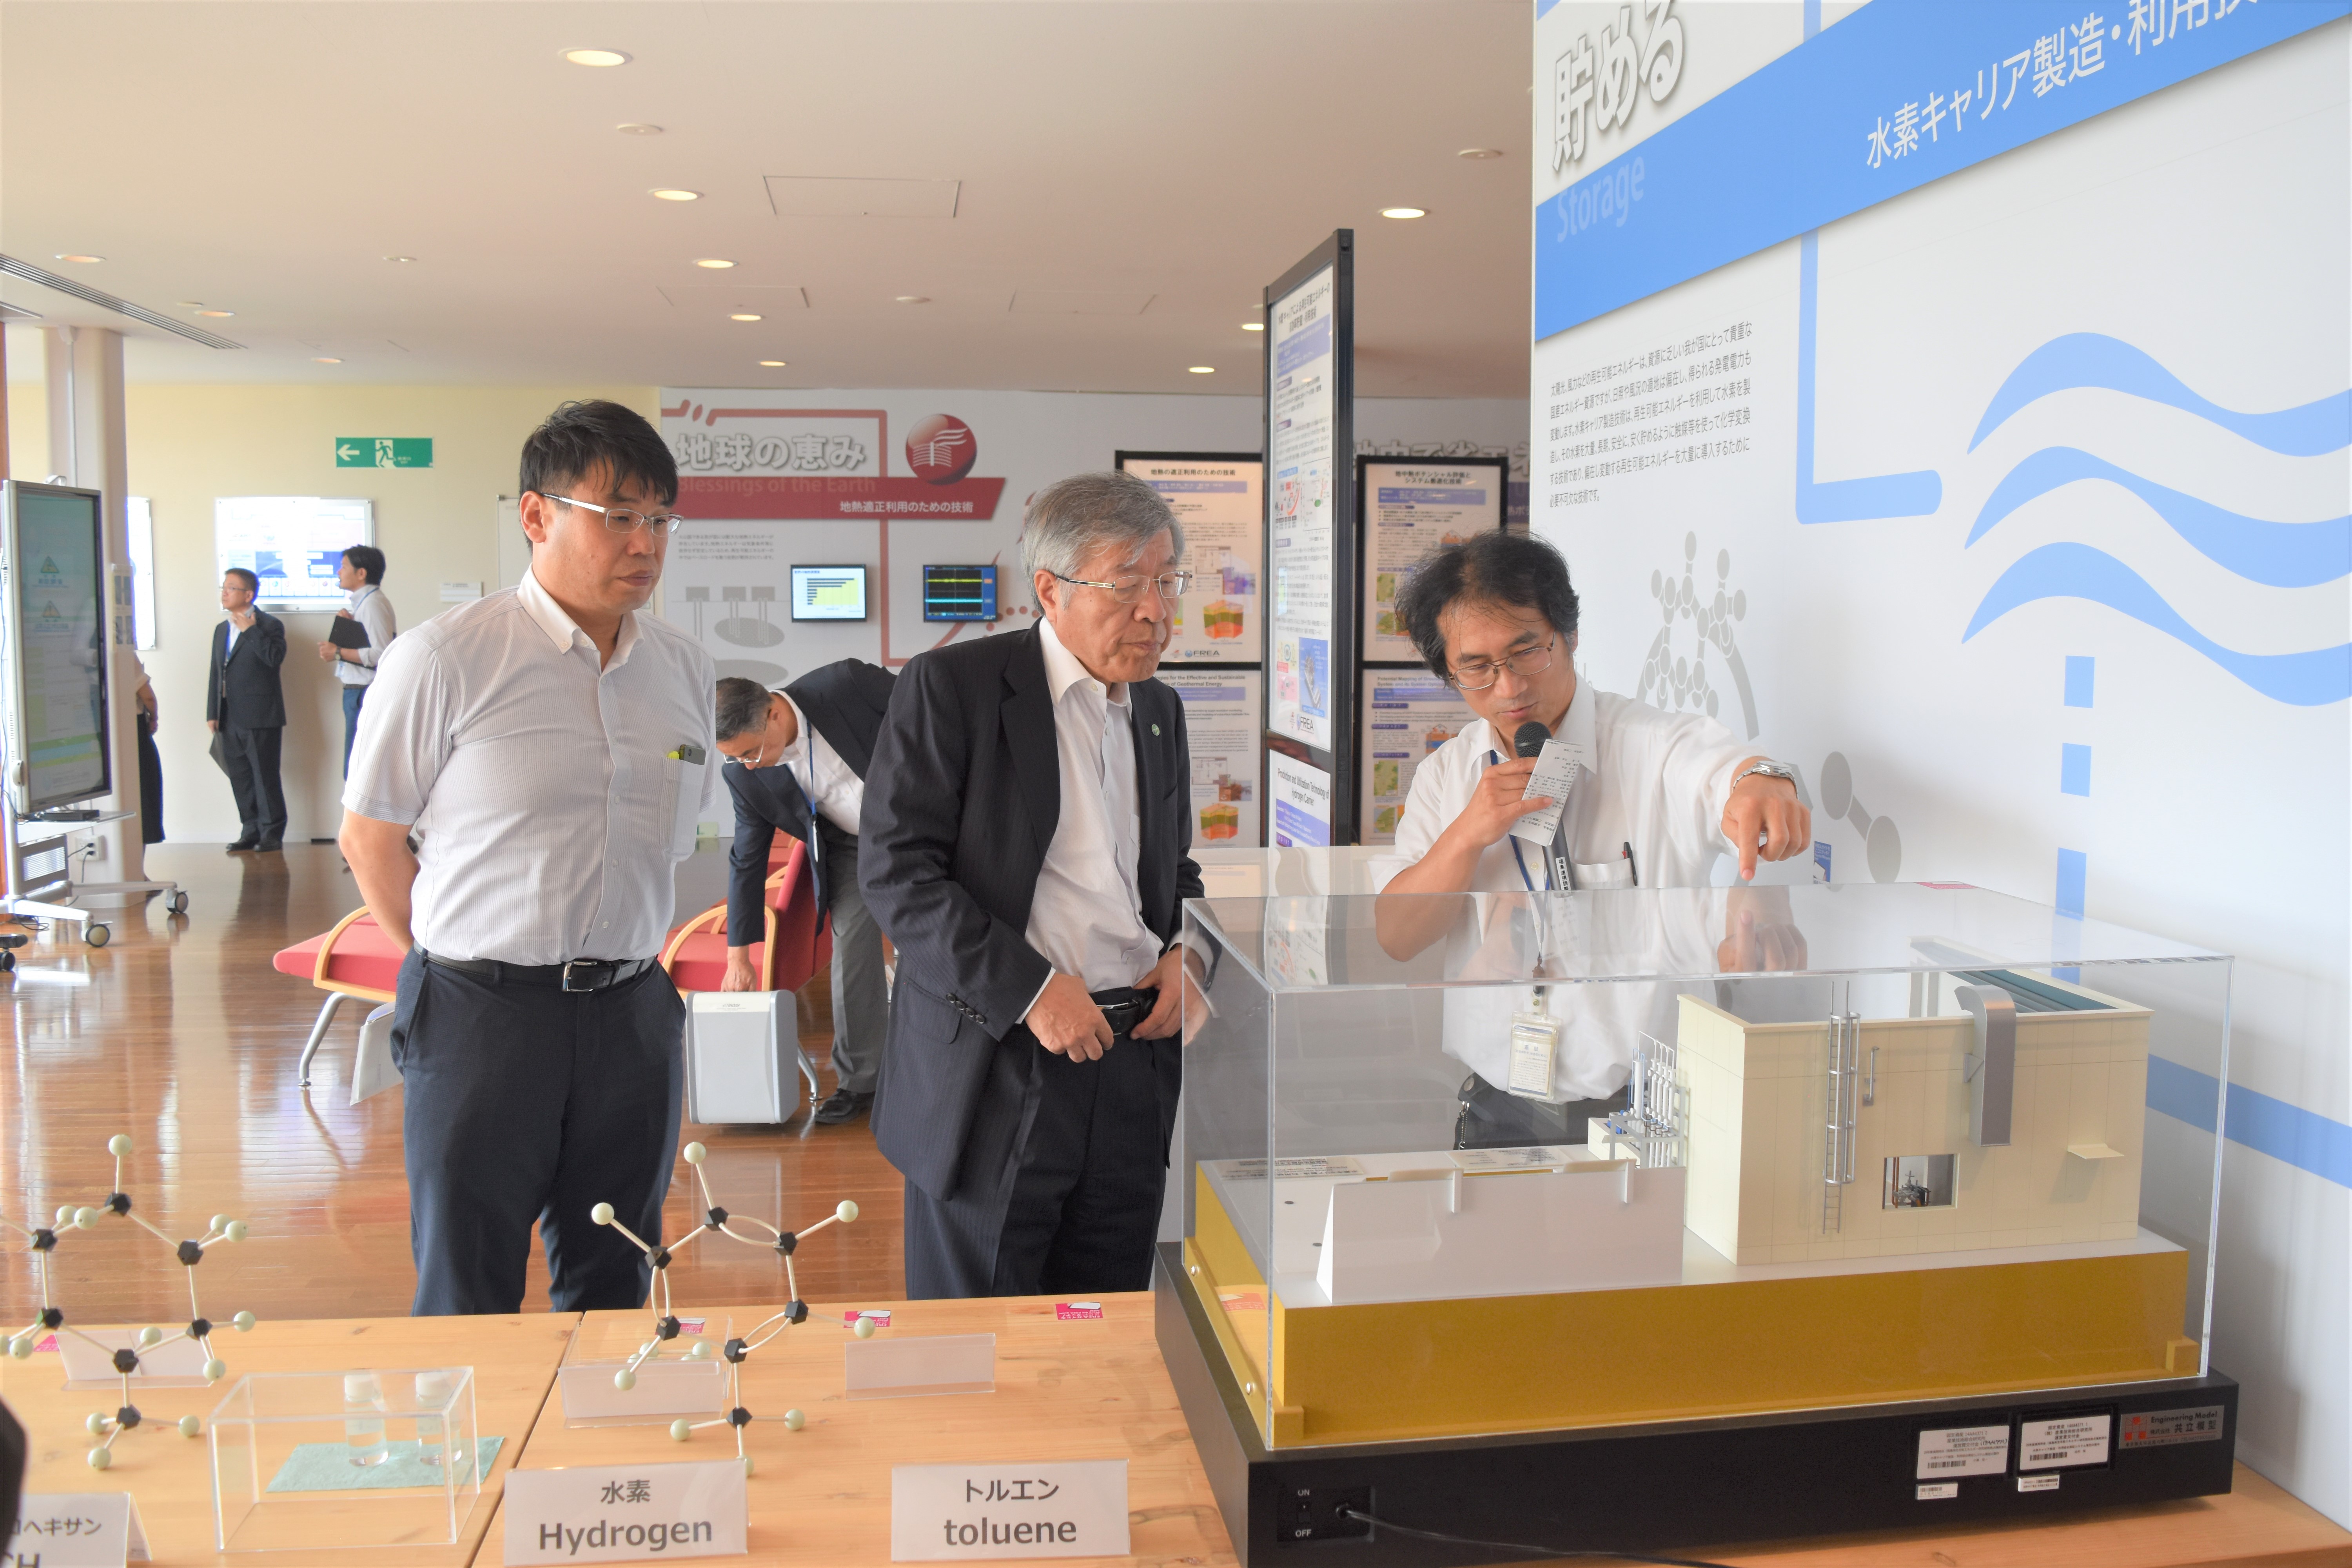 President Kazuo Kyuma (center) listening to an explanation in the Energy Control Building.